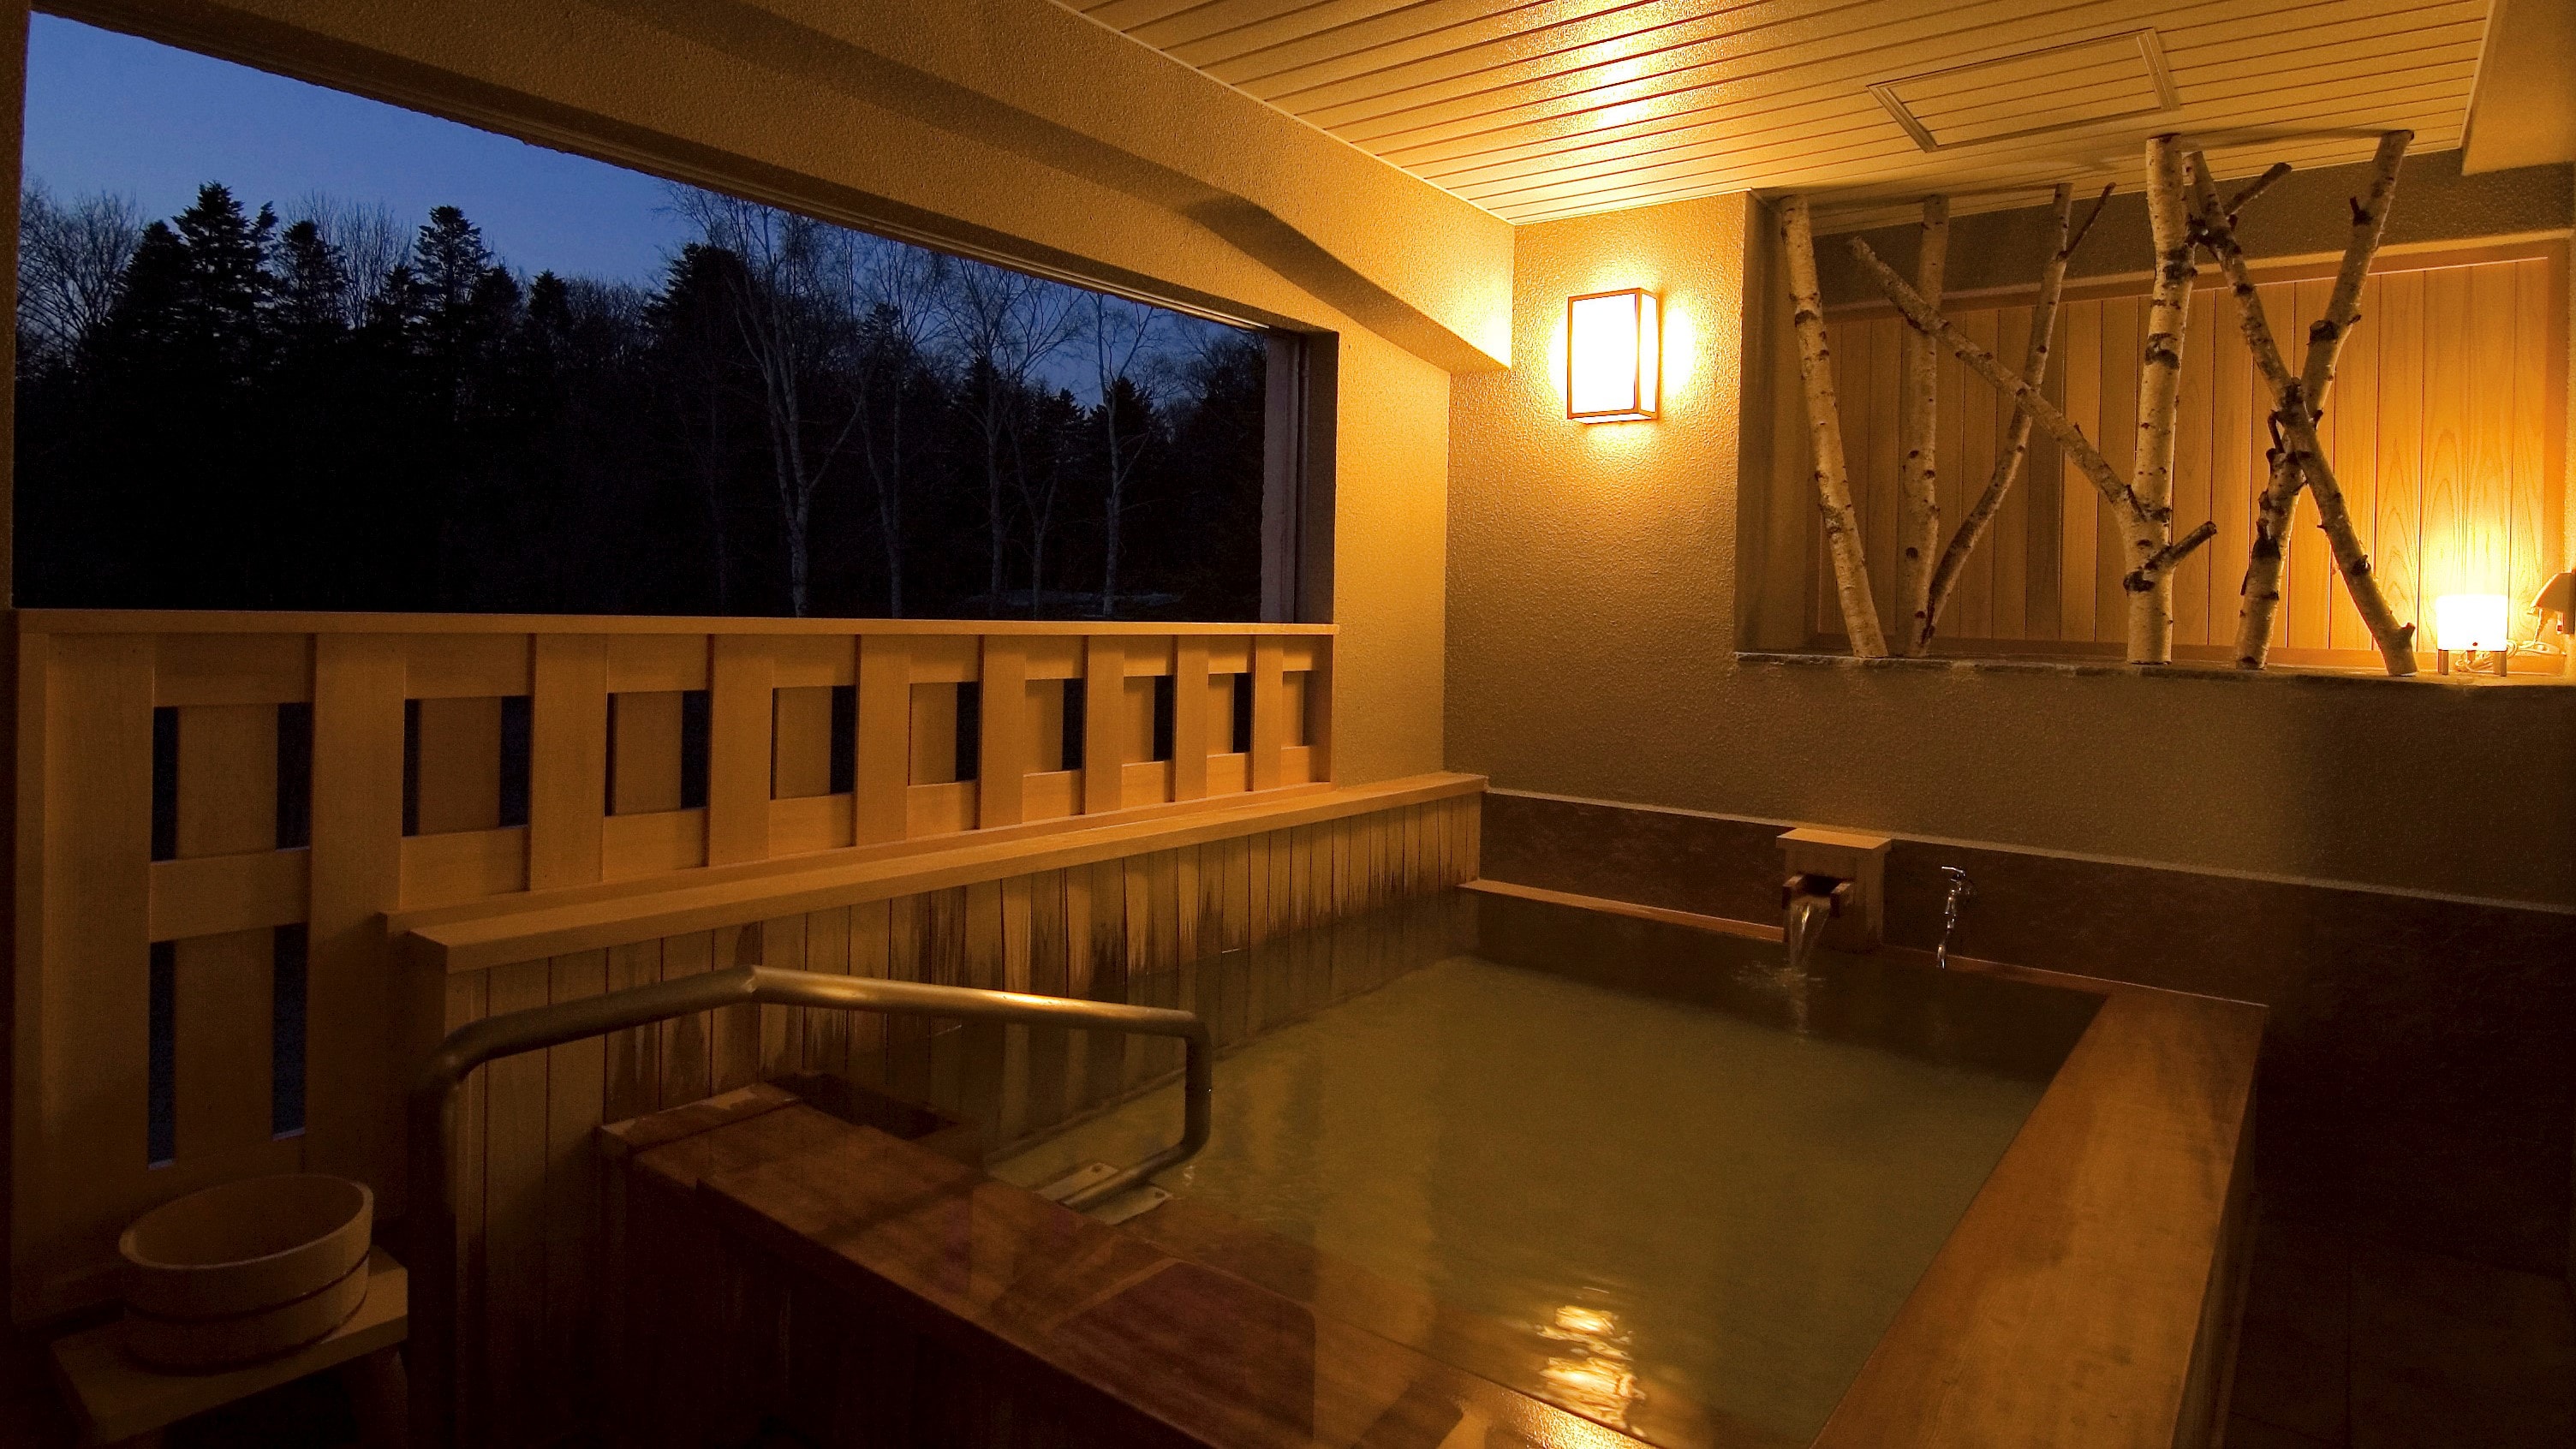 ◆ Private open-air bath (wooden incense / night)